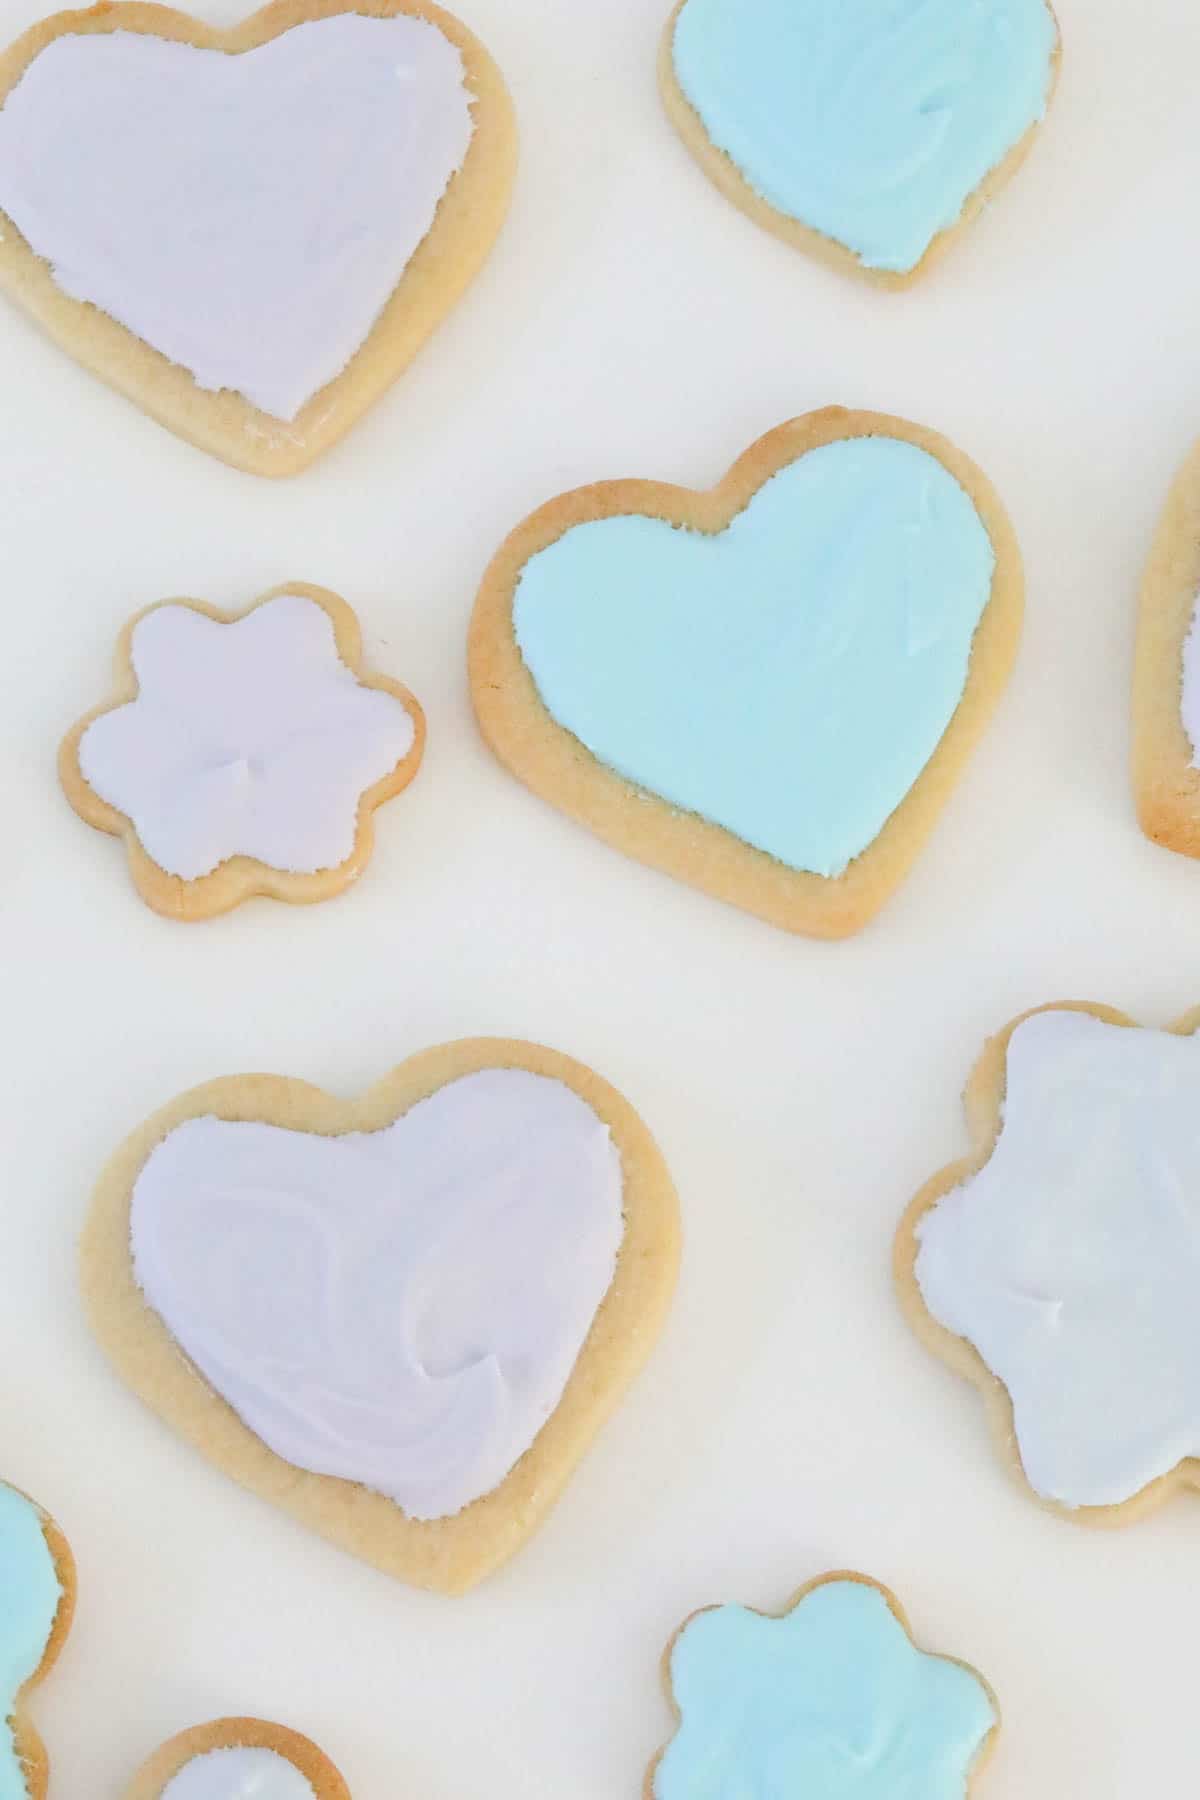 Sugar cookies in various shapes decorated with pale pink and blue royal icing.